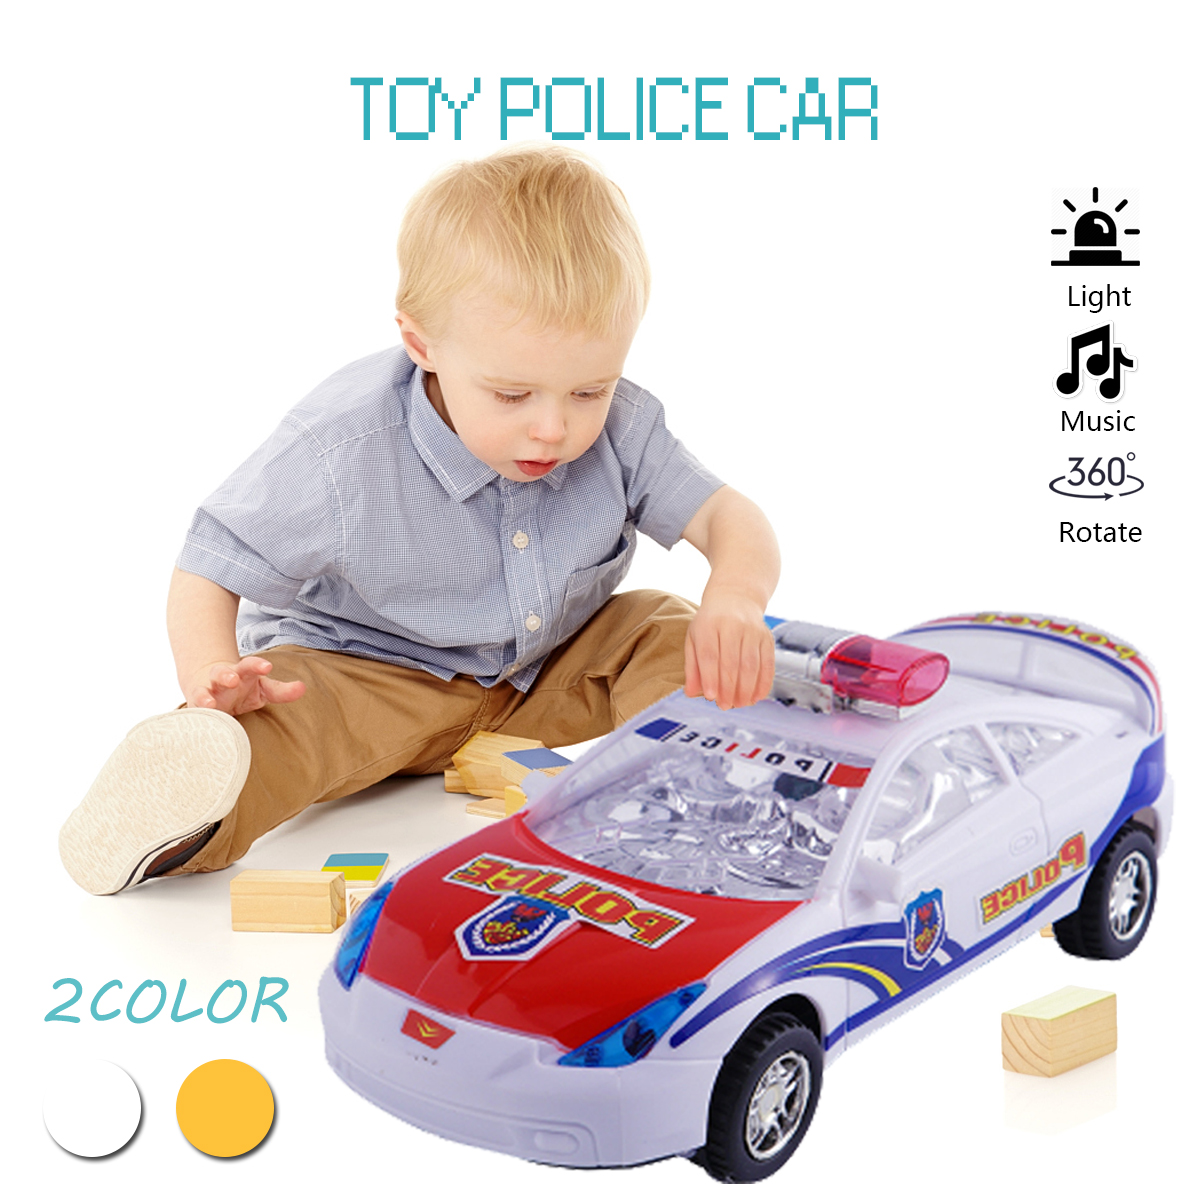 Childrens-Electric-Alloy-Simulation-Po-lice-Car-Diecast-Model-Toy-with-LED-Light-and-Music-1604579-2